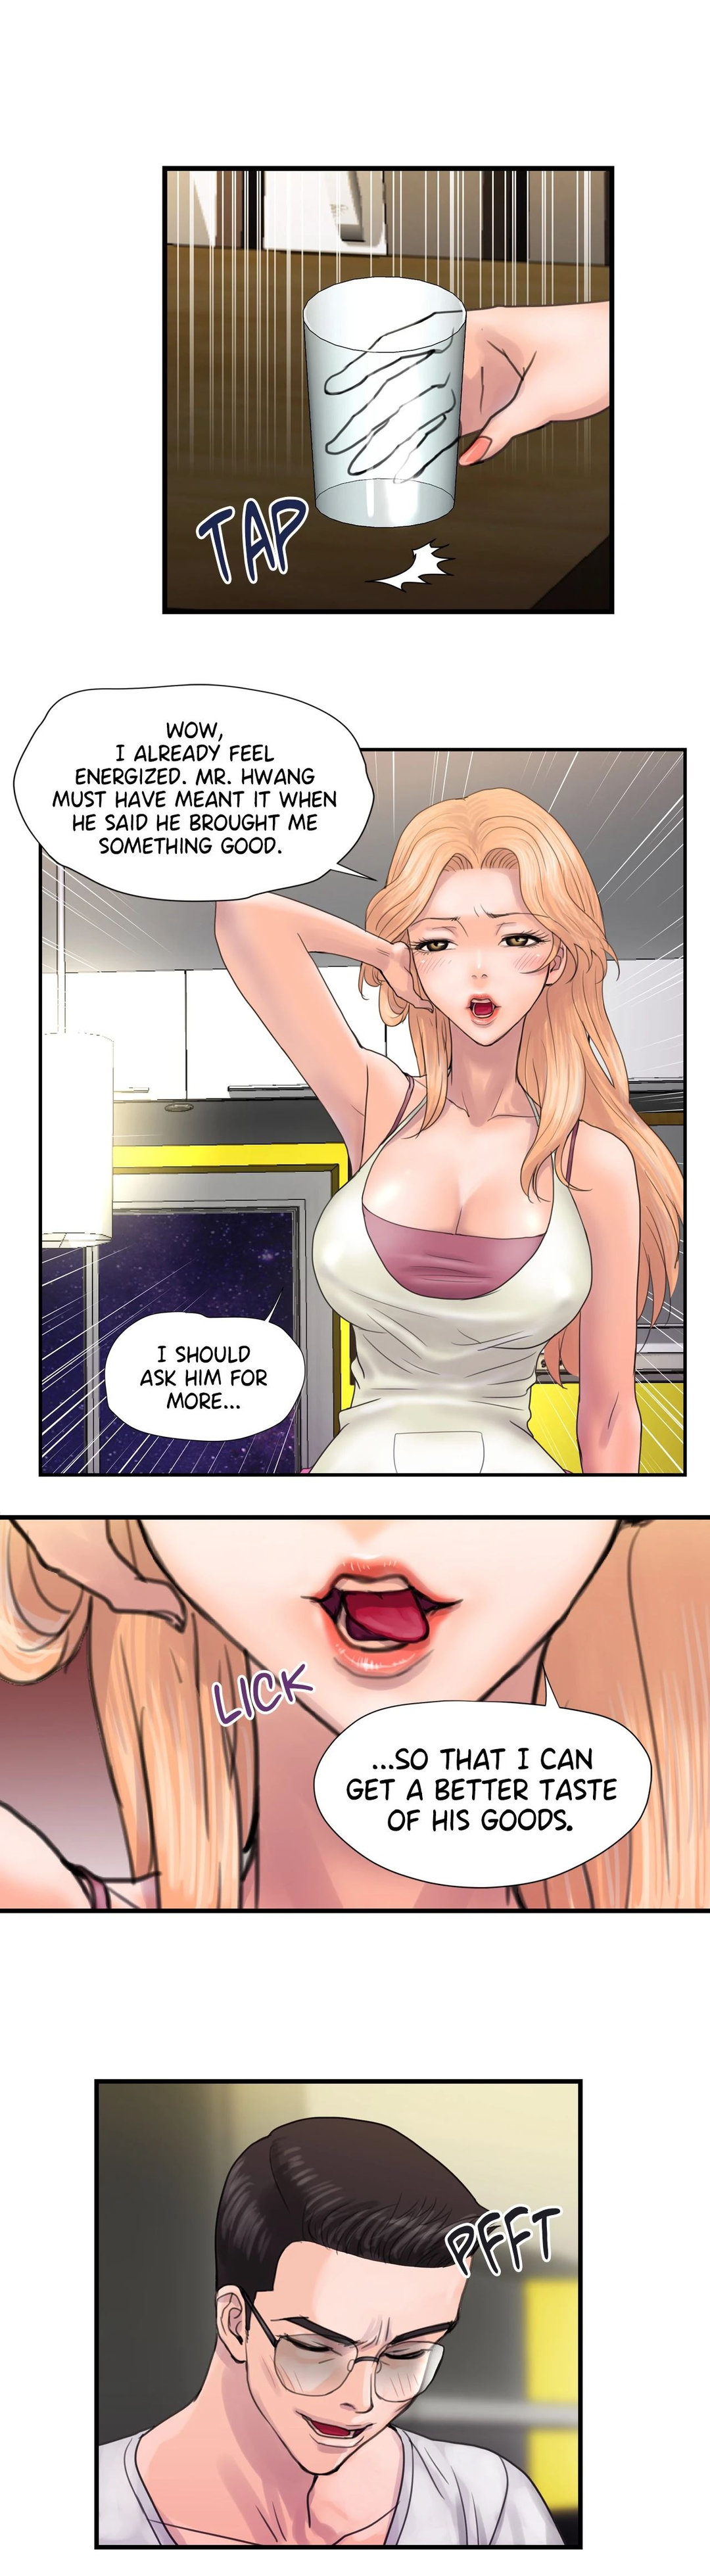 Cheater’s Paradise - Chapter 3 Page 4